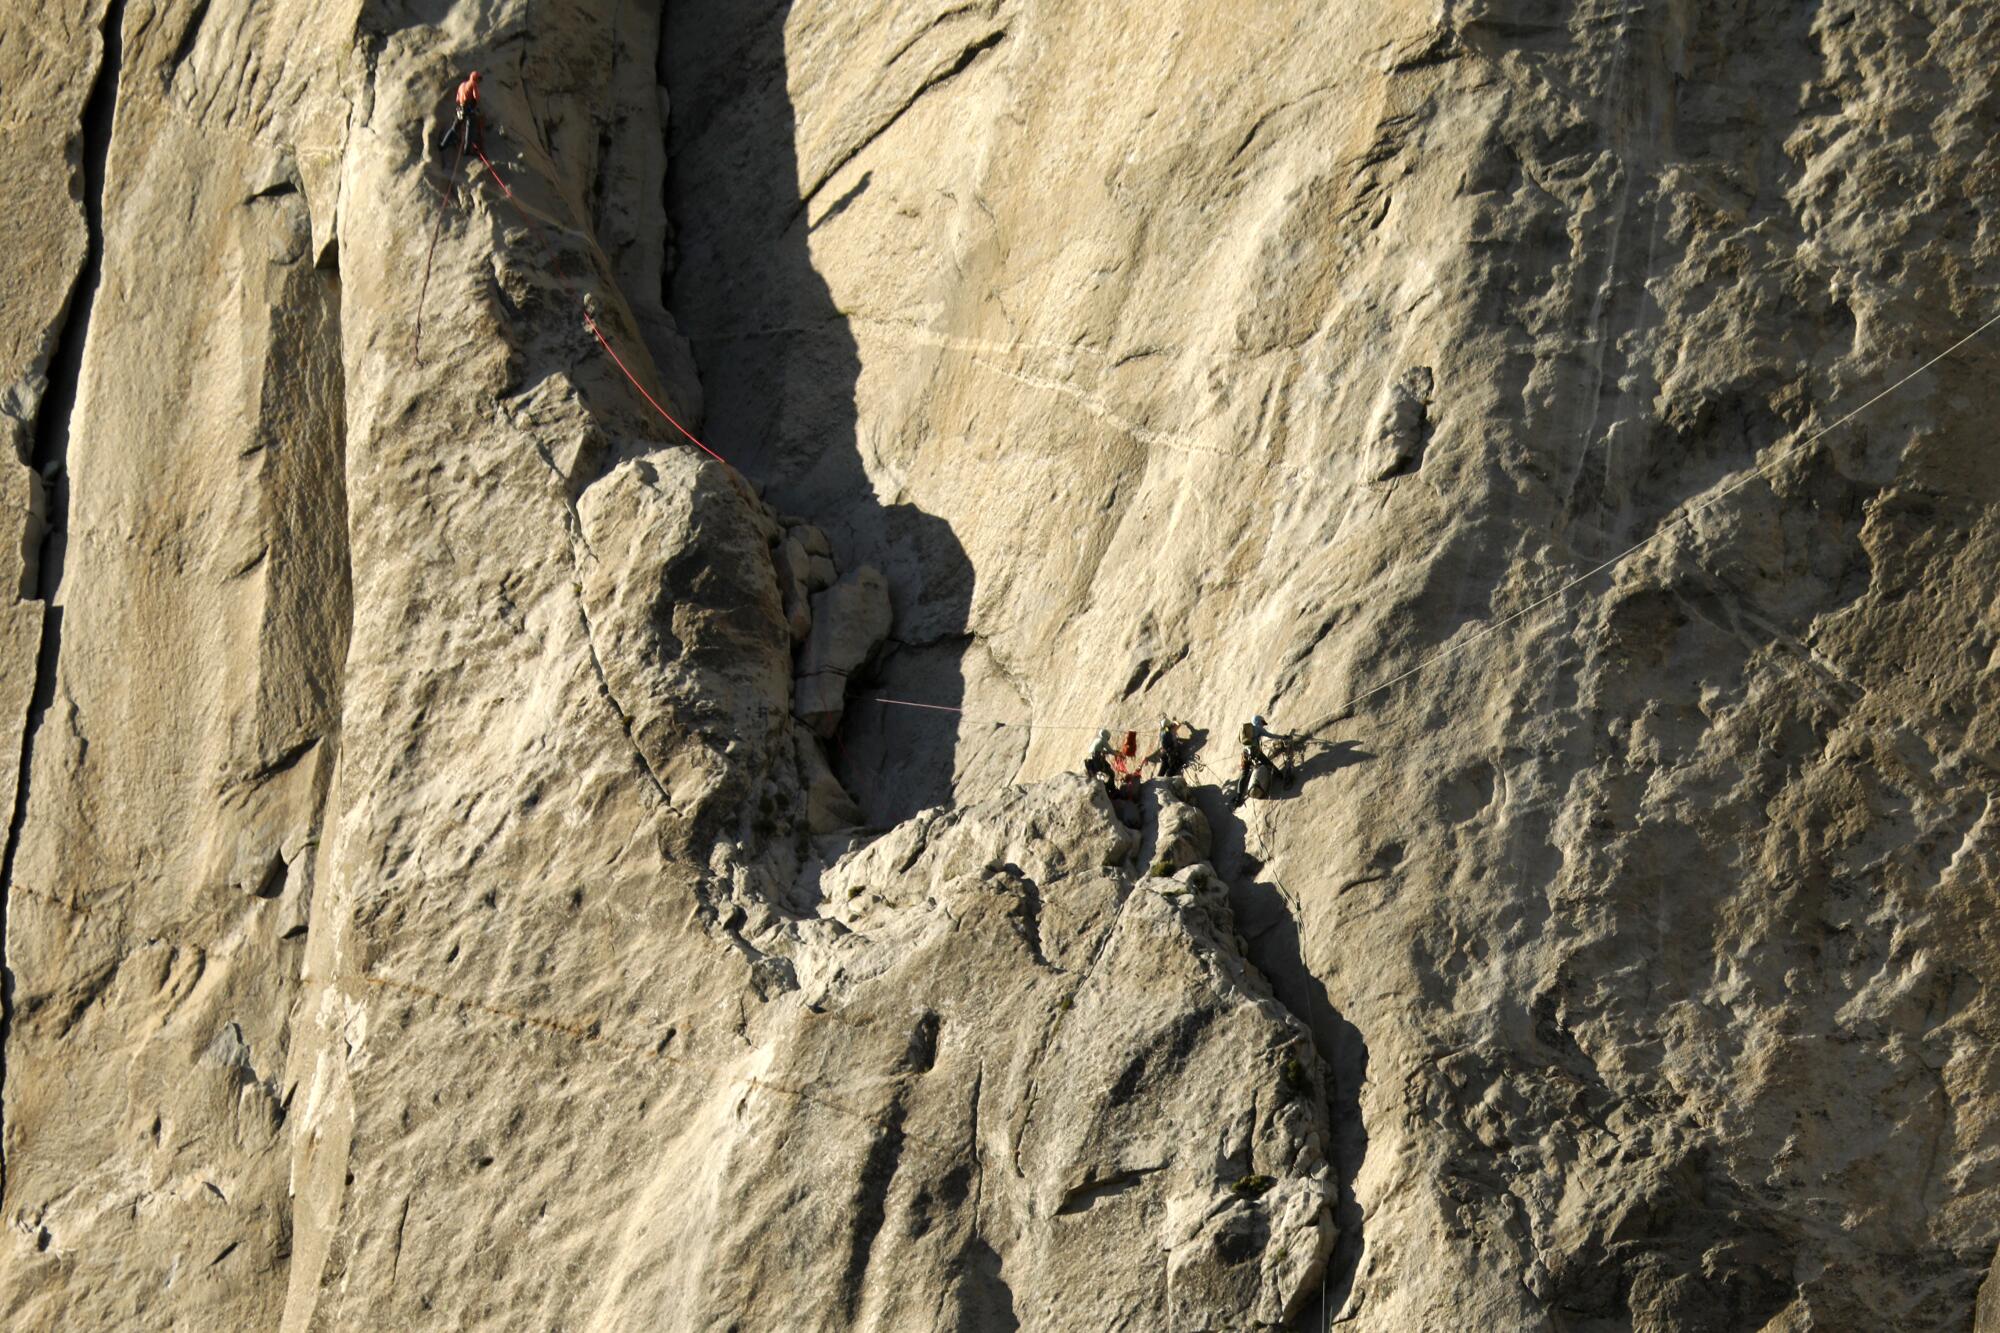 A few climbers on ropes ascend the side of a sheer rock face, seen from a distance